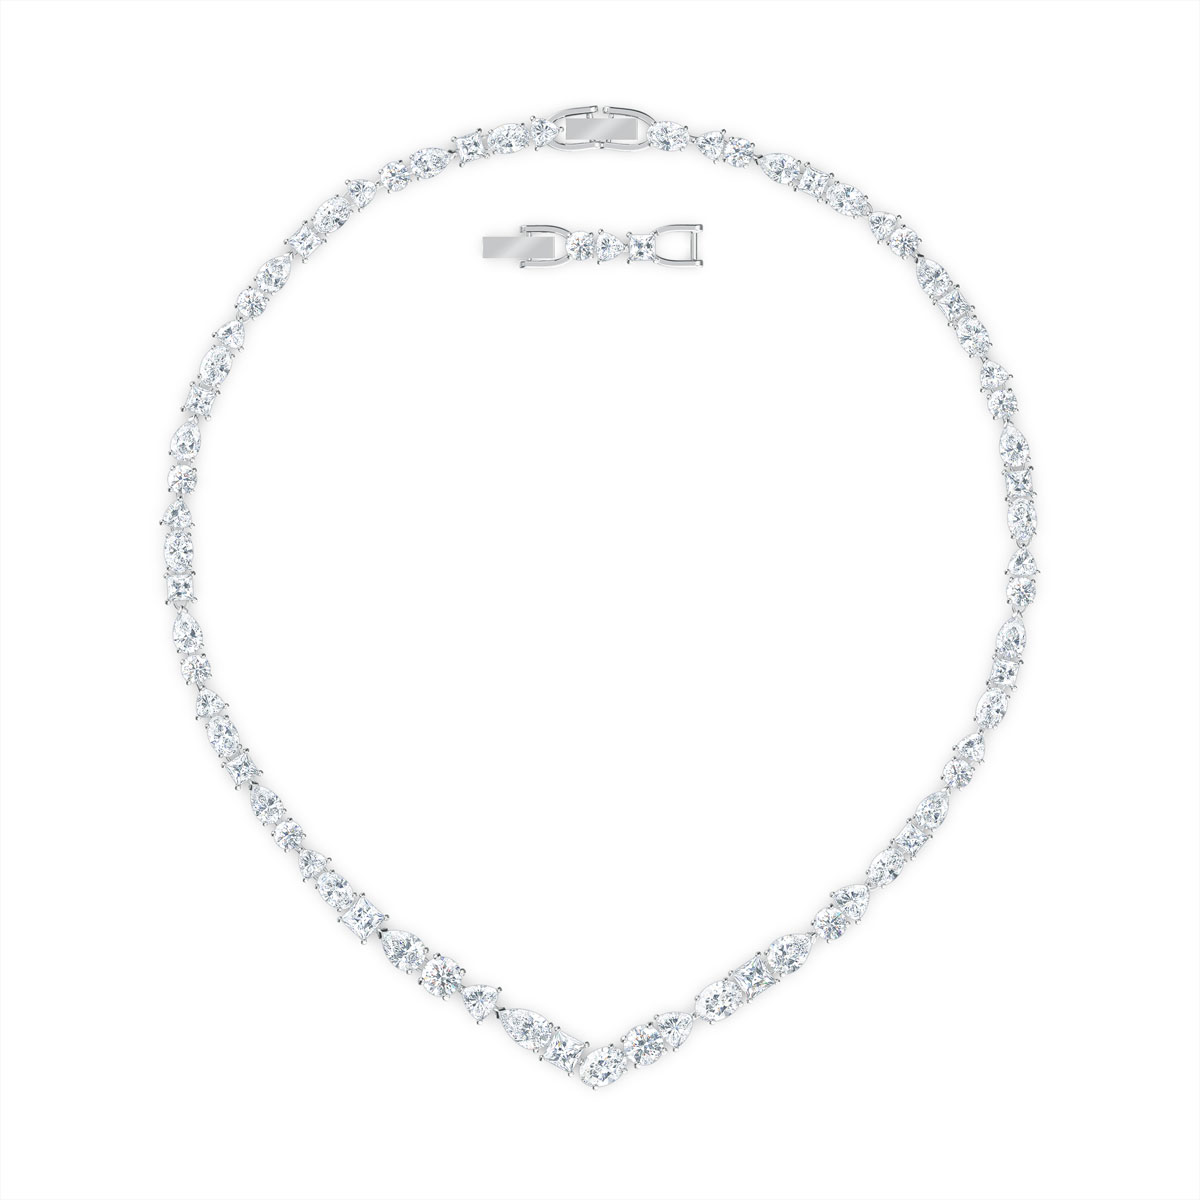 Swarovski Tennis Deluxe Mixed V Necklace, White, Rhodium Plated